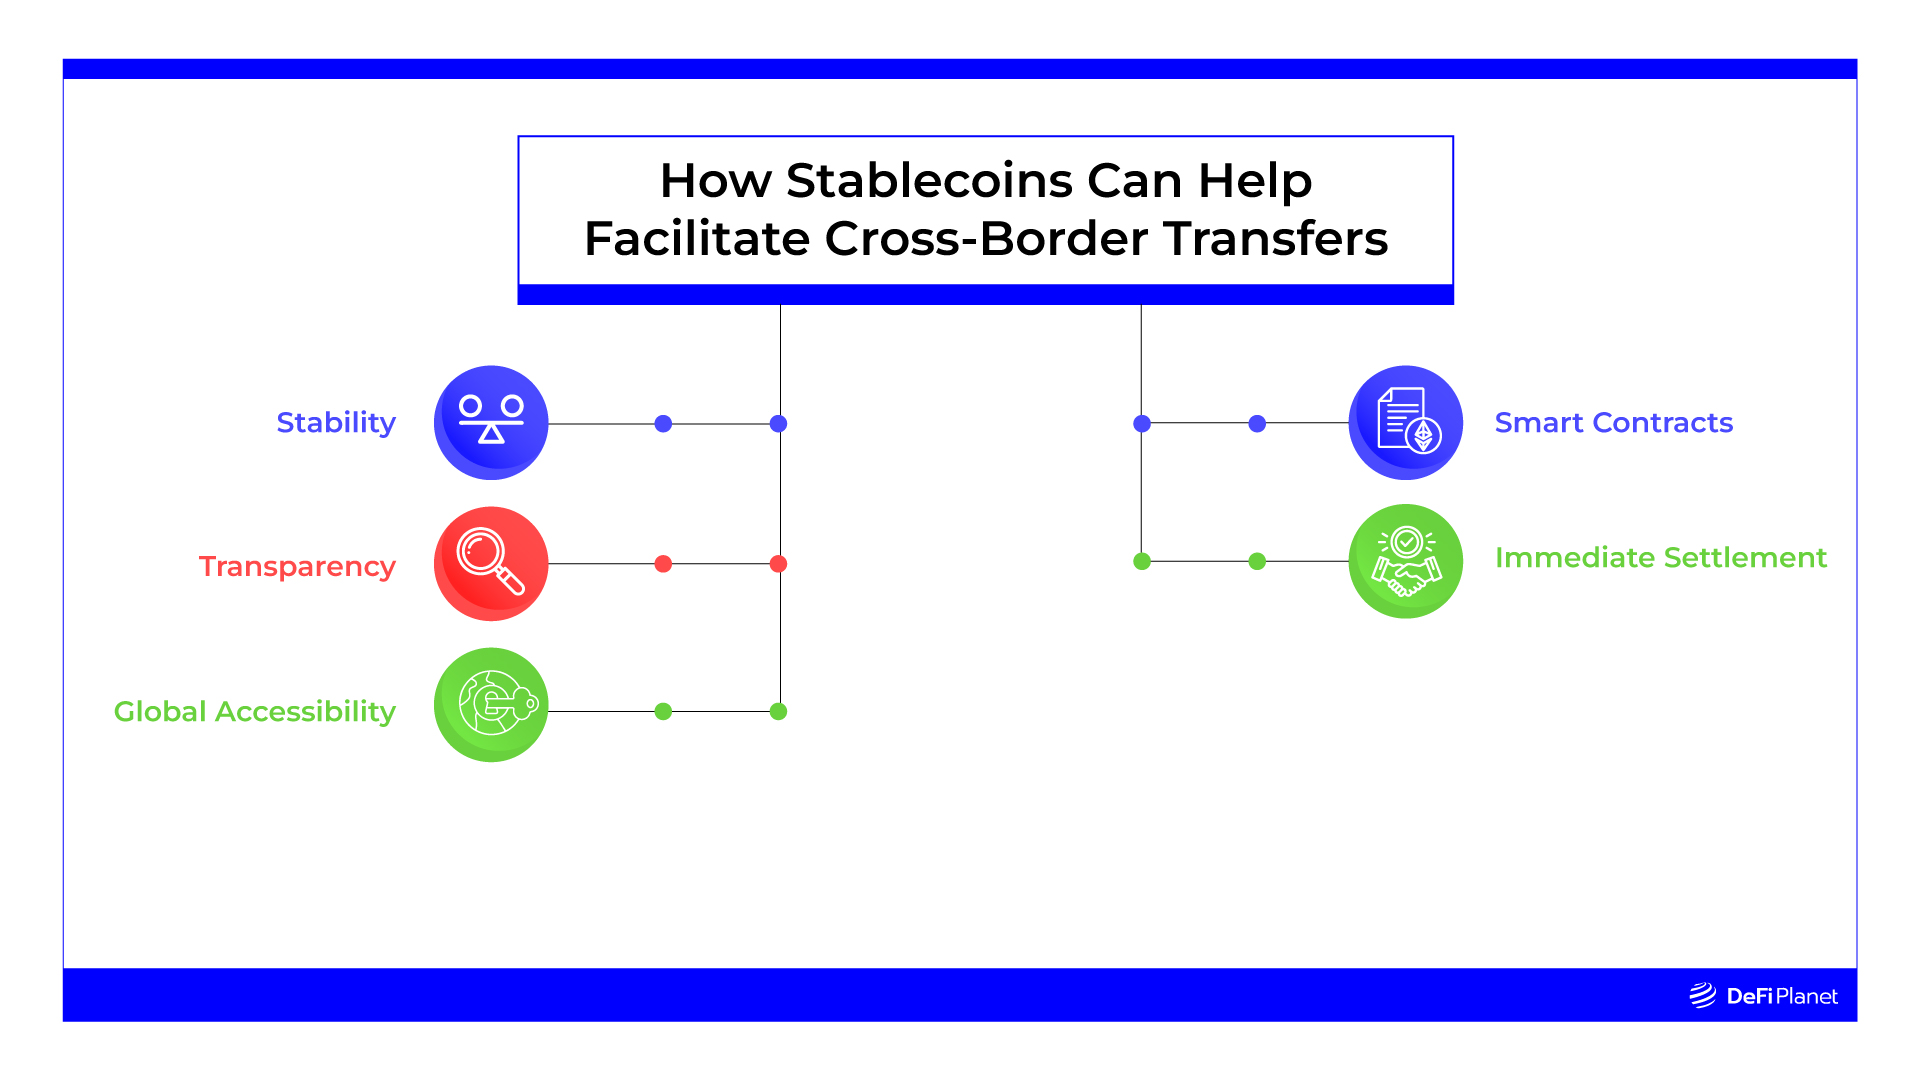 How Stablecoins Can Help Facilitate Cross-Border Transfers